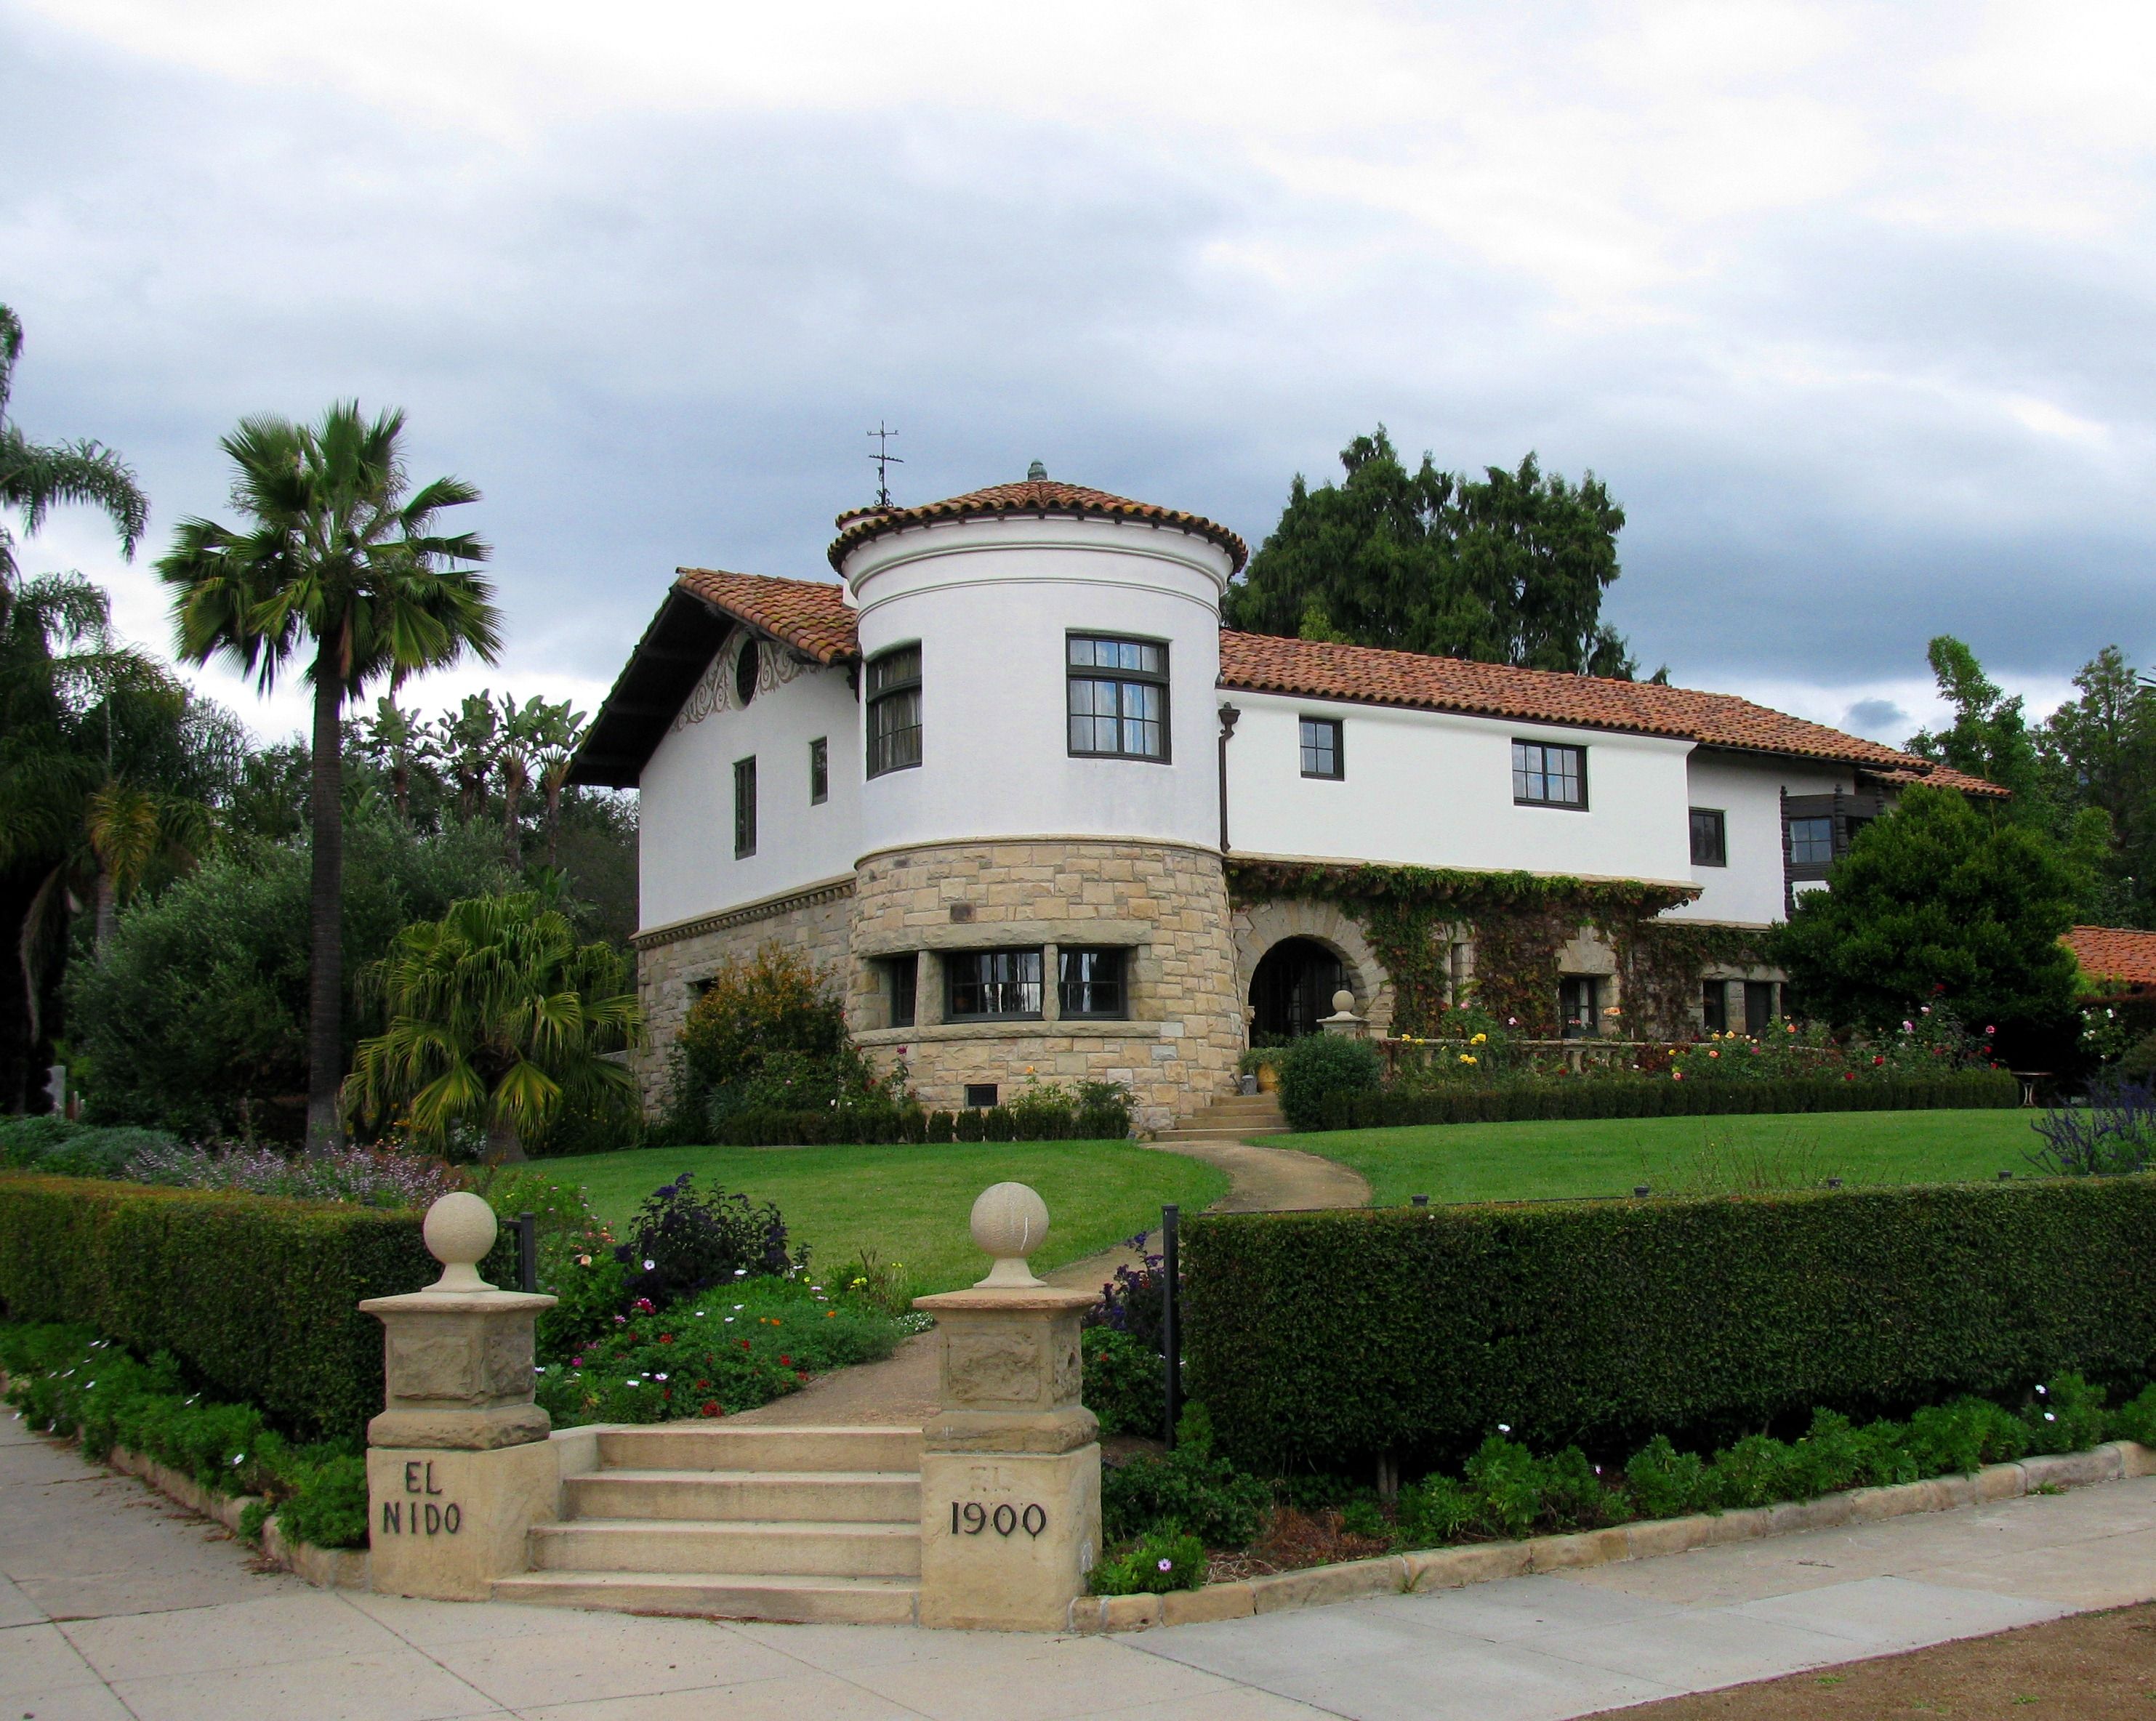 The Santa Barbara landmark residence known as the Charles H. Hopkins Home, with stone pillars and a hedge leading to a lush lawn, and the two-story home with its large turret